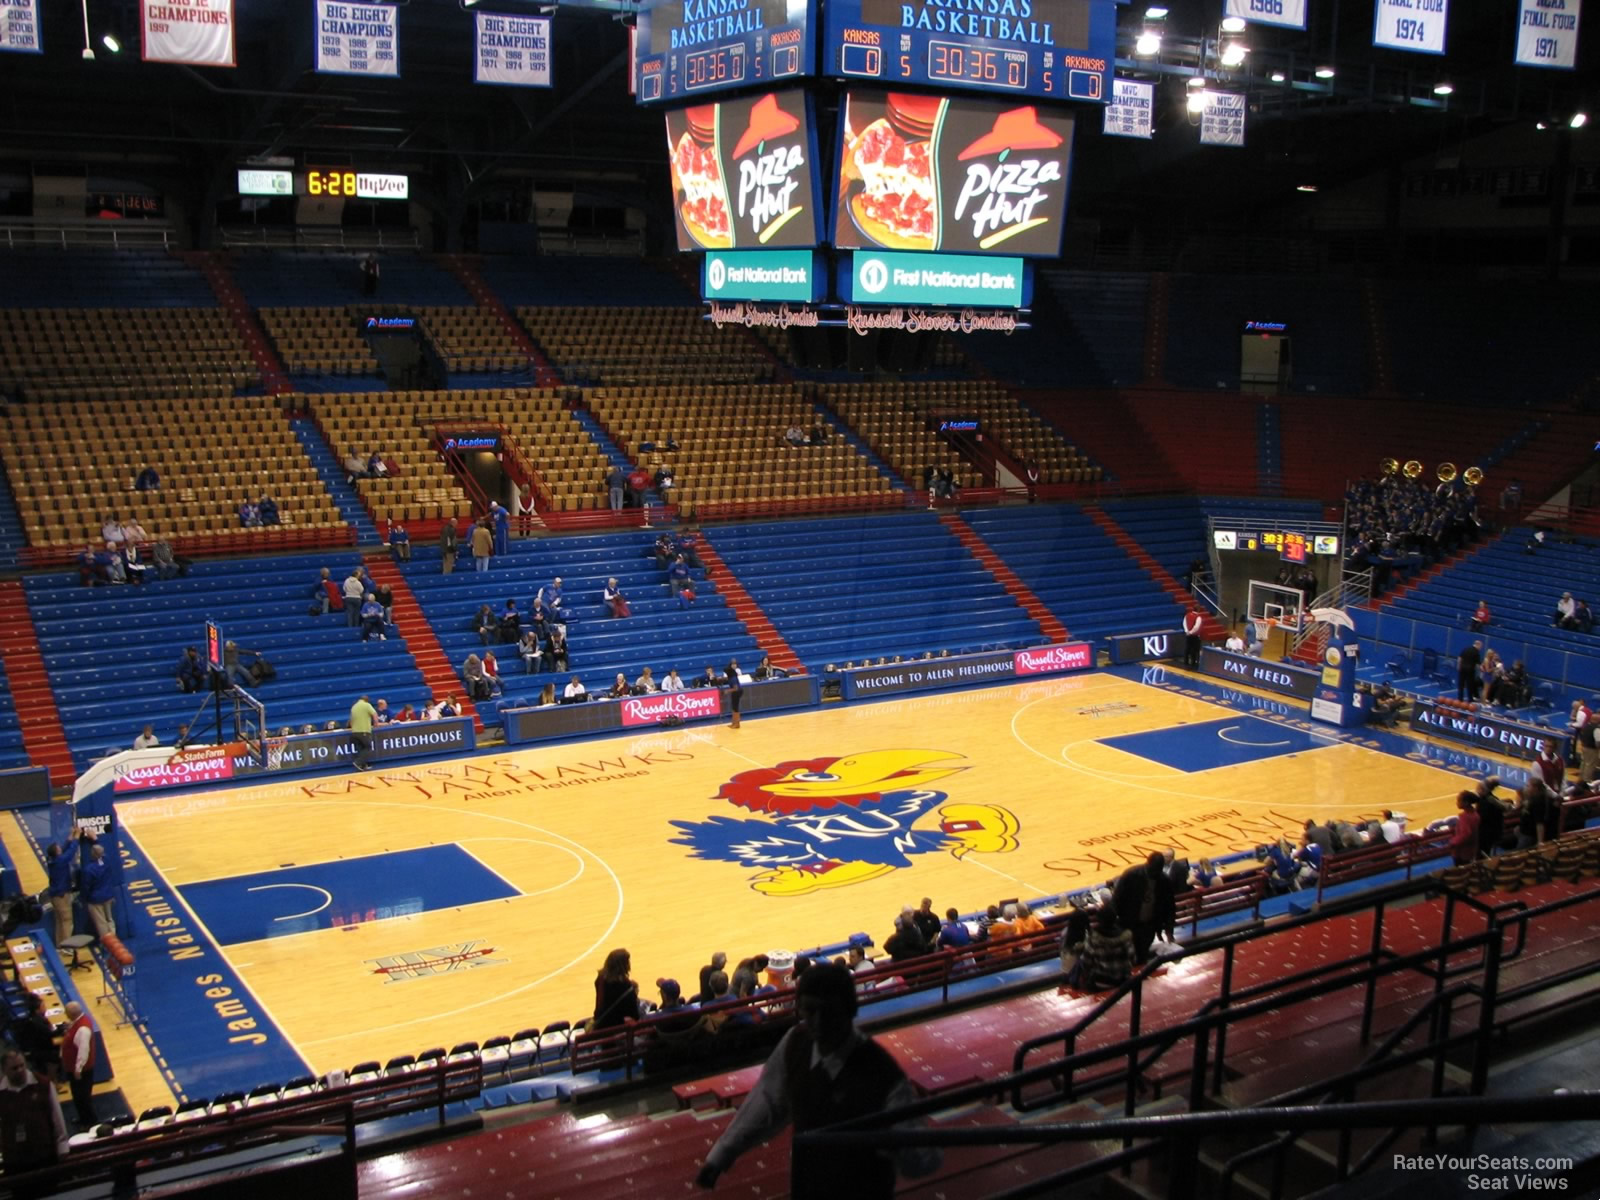 section 19, row 18 seat view  - allen fieldhouse